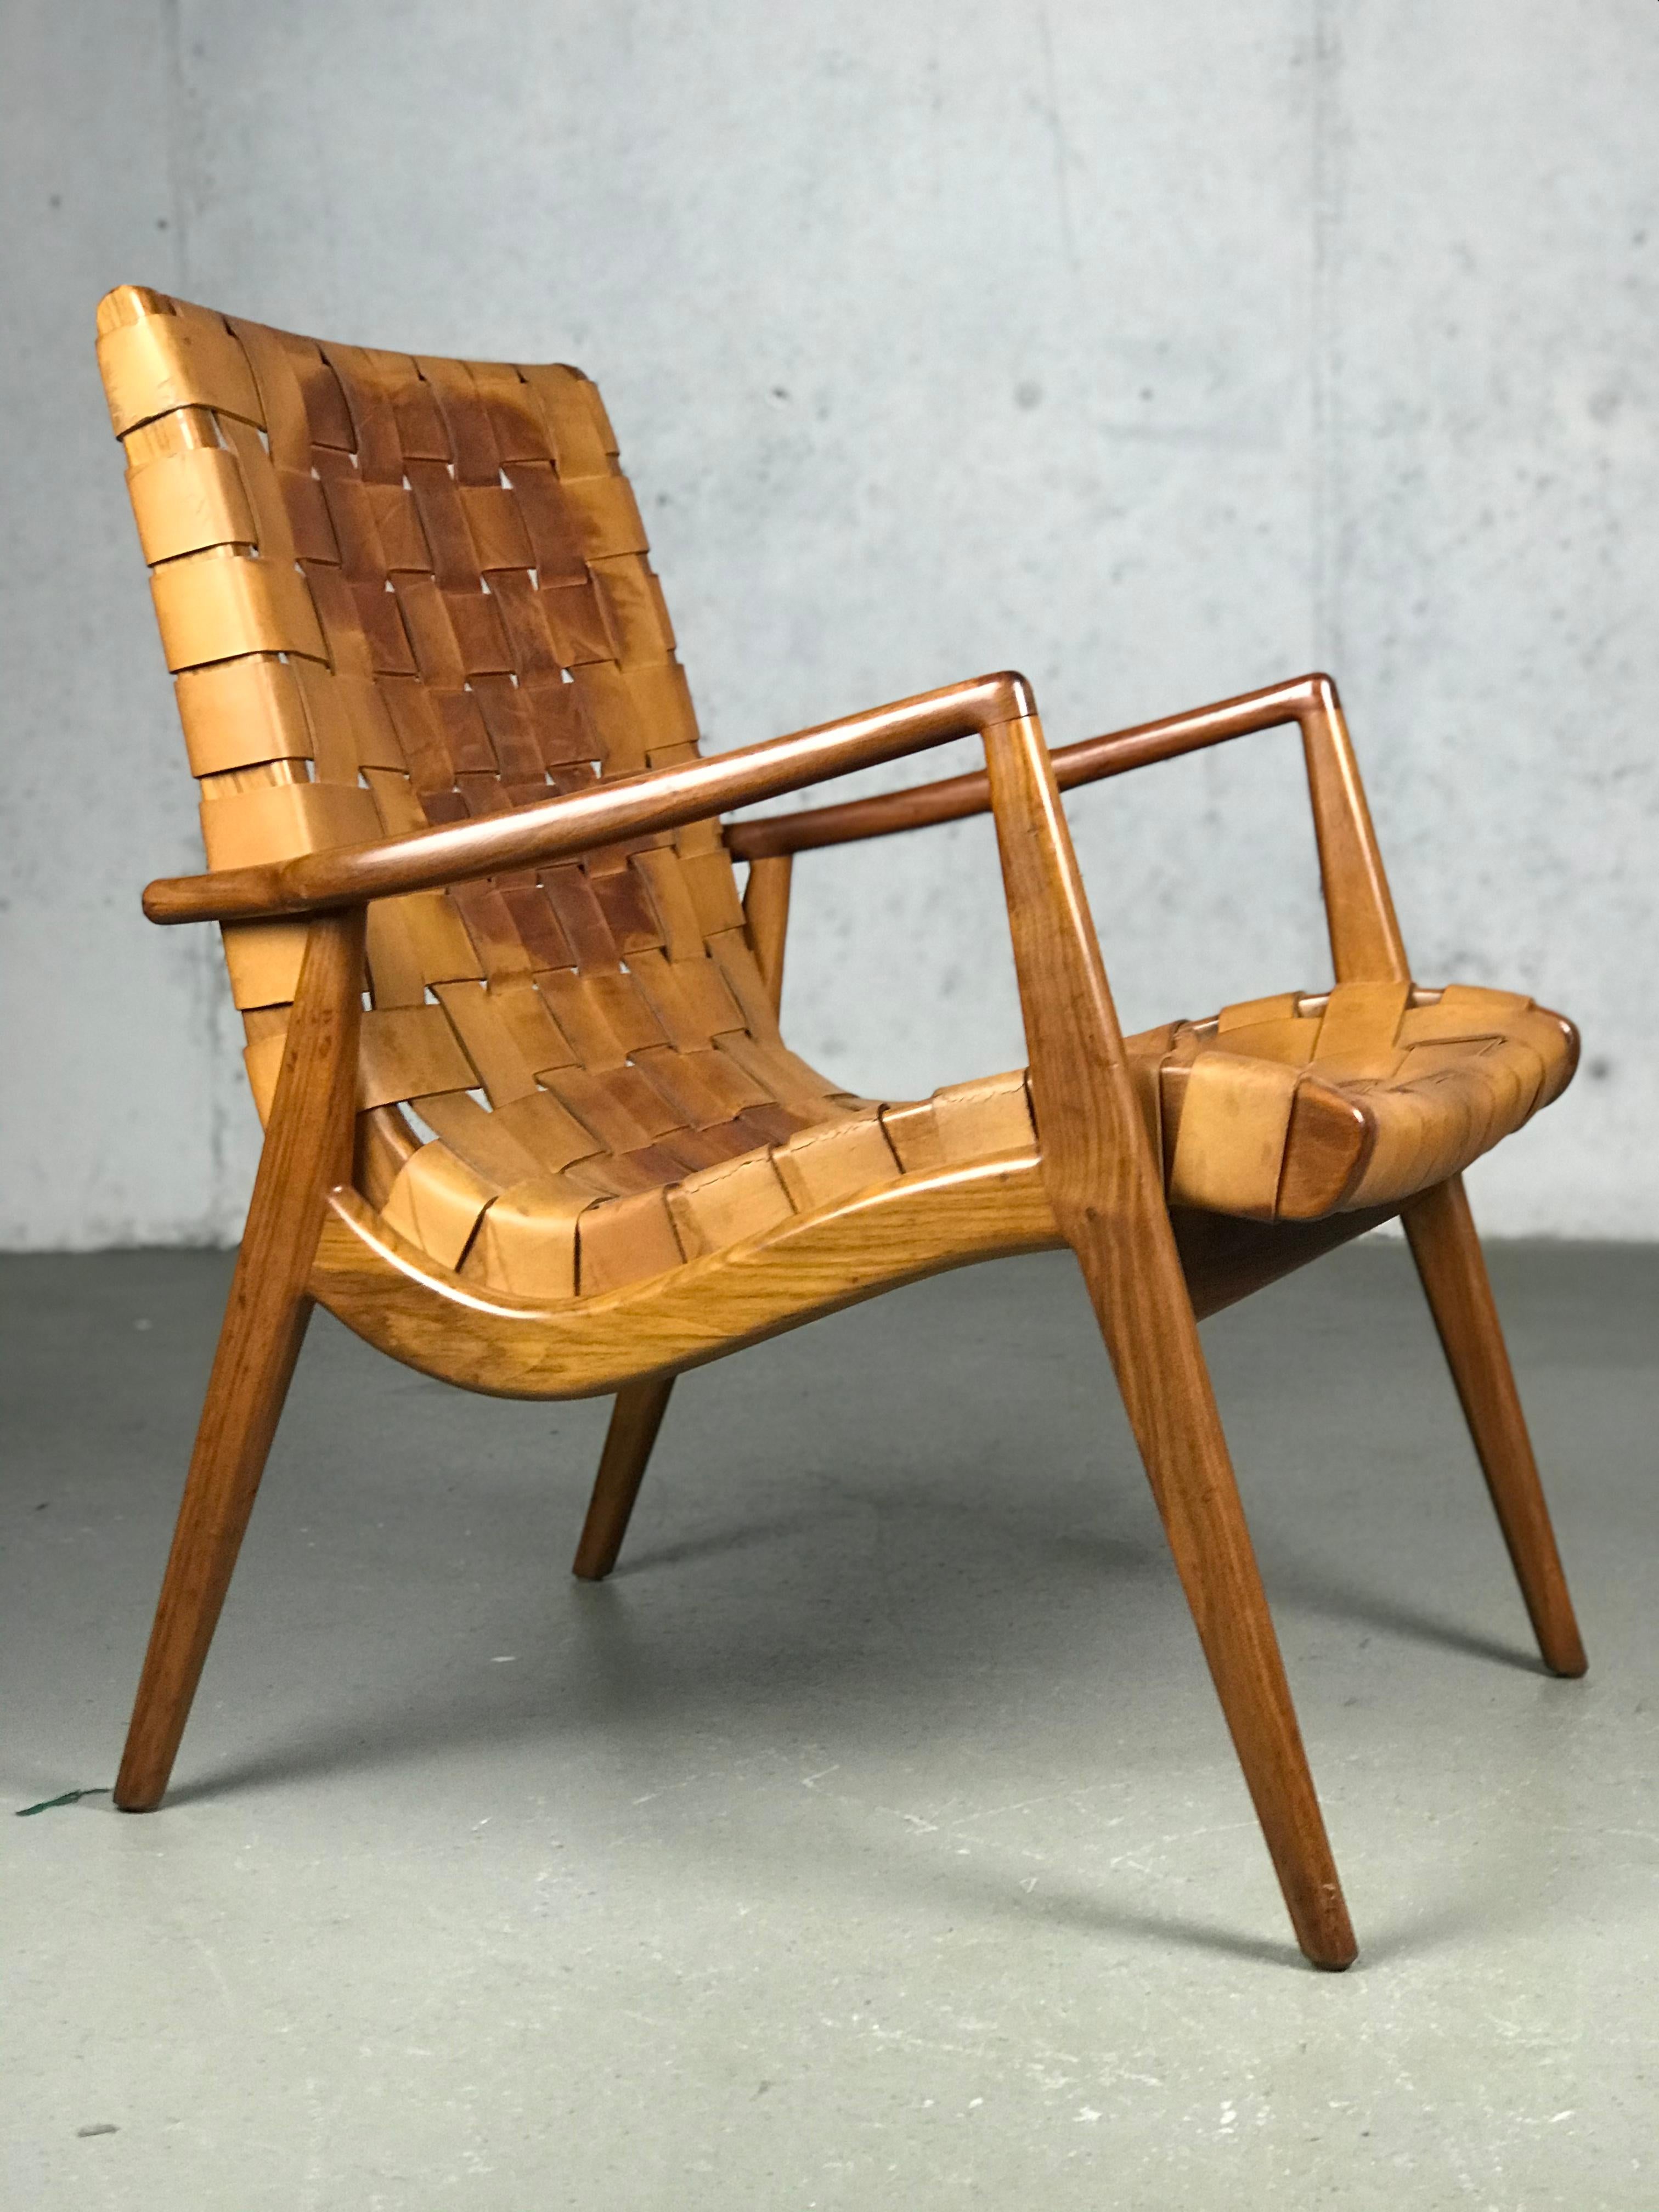 A beautiful and original woven leather lounge chair and ottoman by Mel Smilow, 1956. The original leather has plenty of patina and the walnut graining is impressive. The wood has not been refinished and the leather has one strap broken at the edge